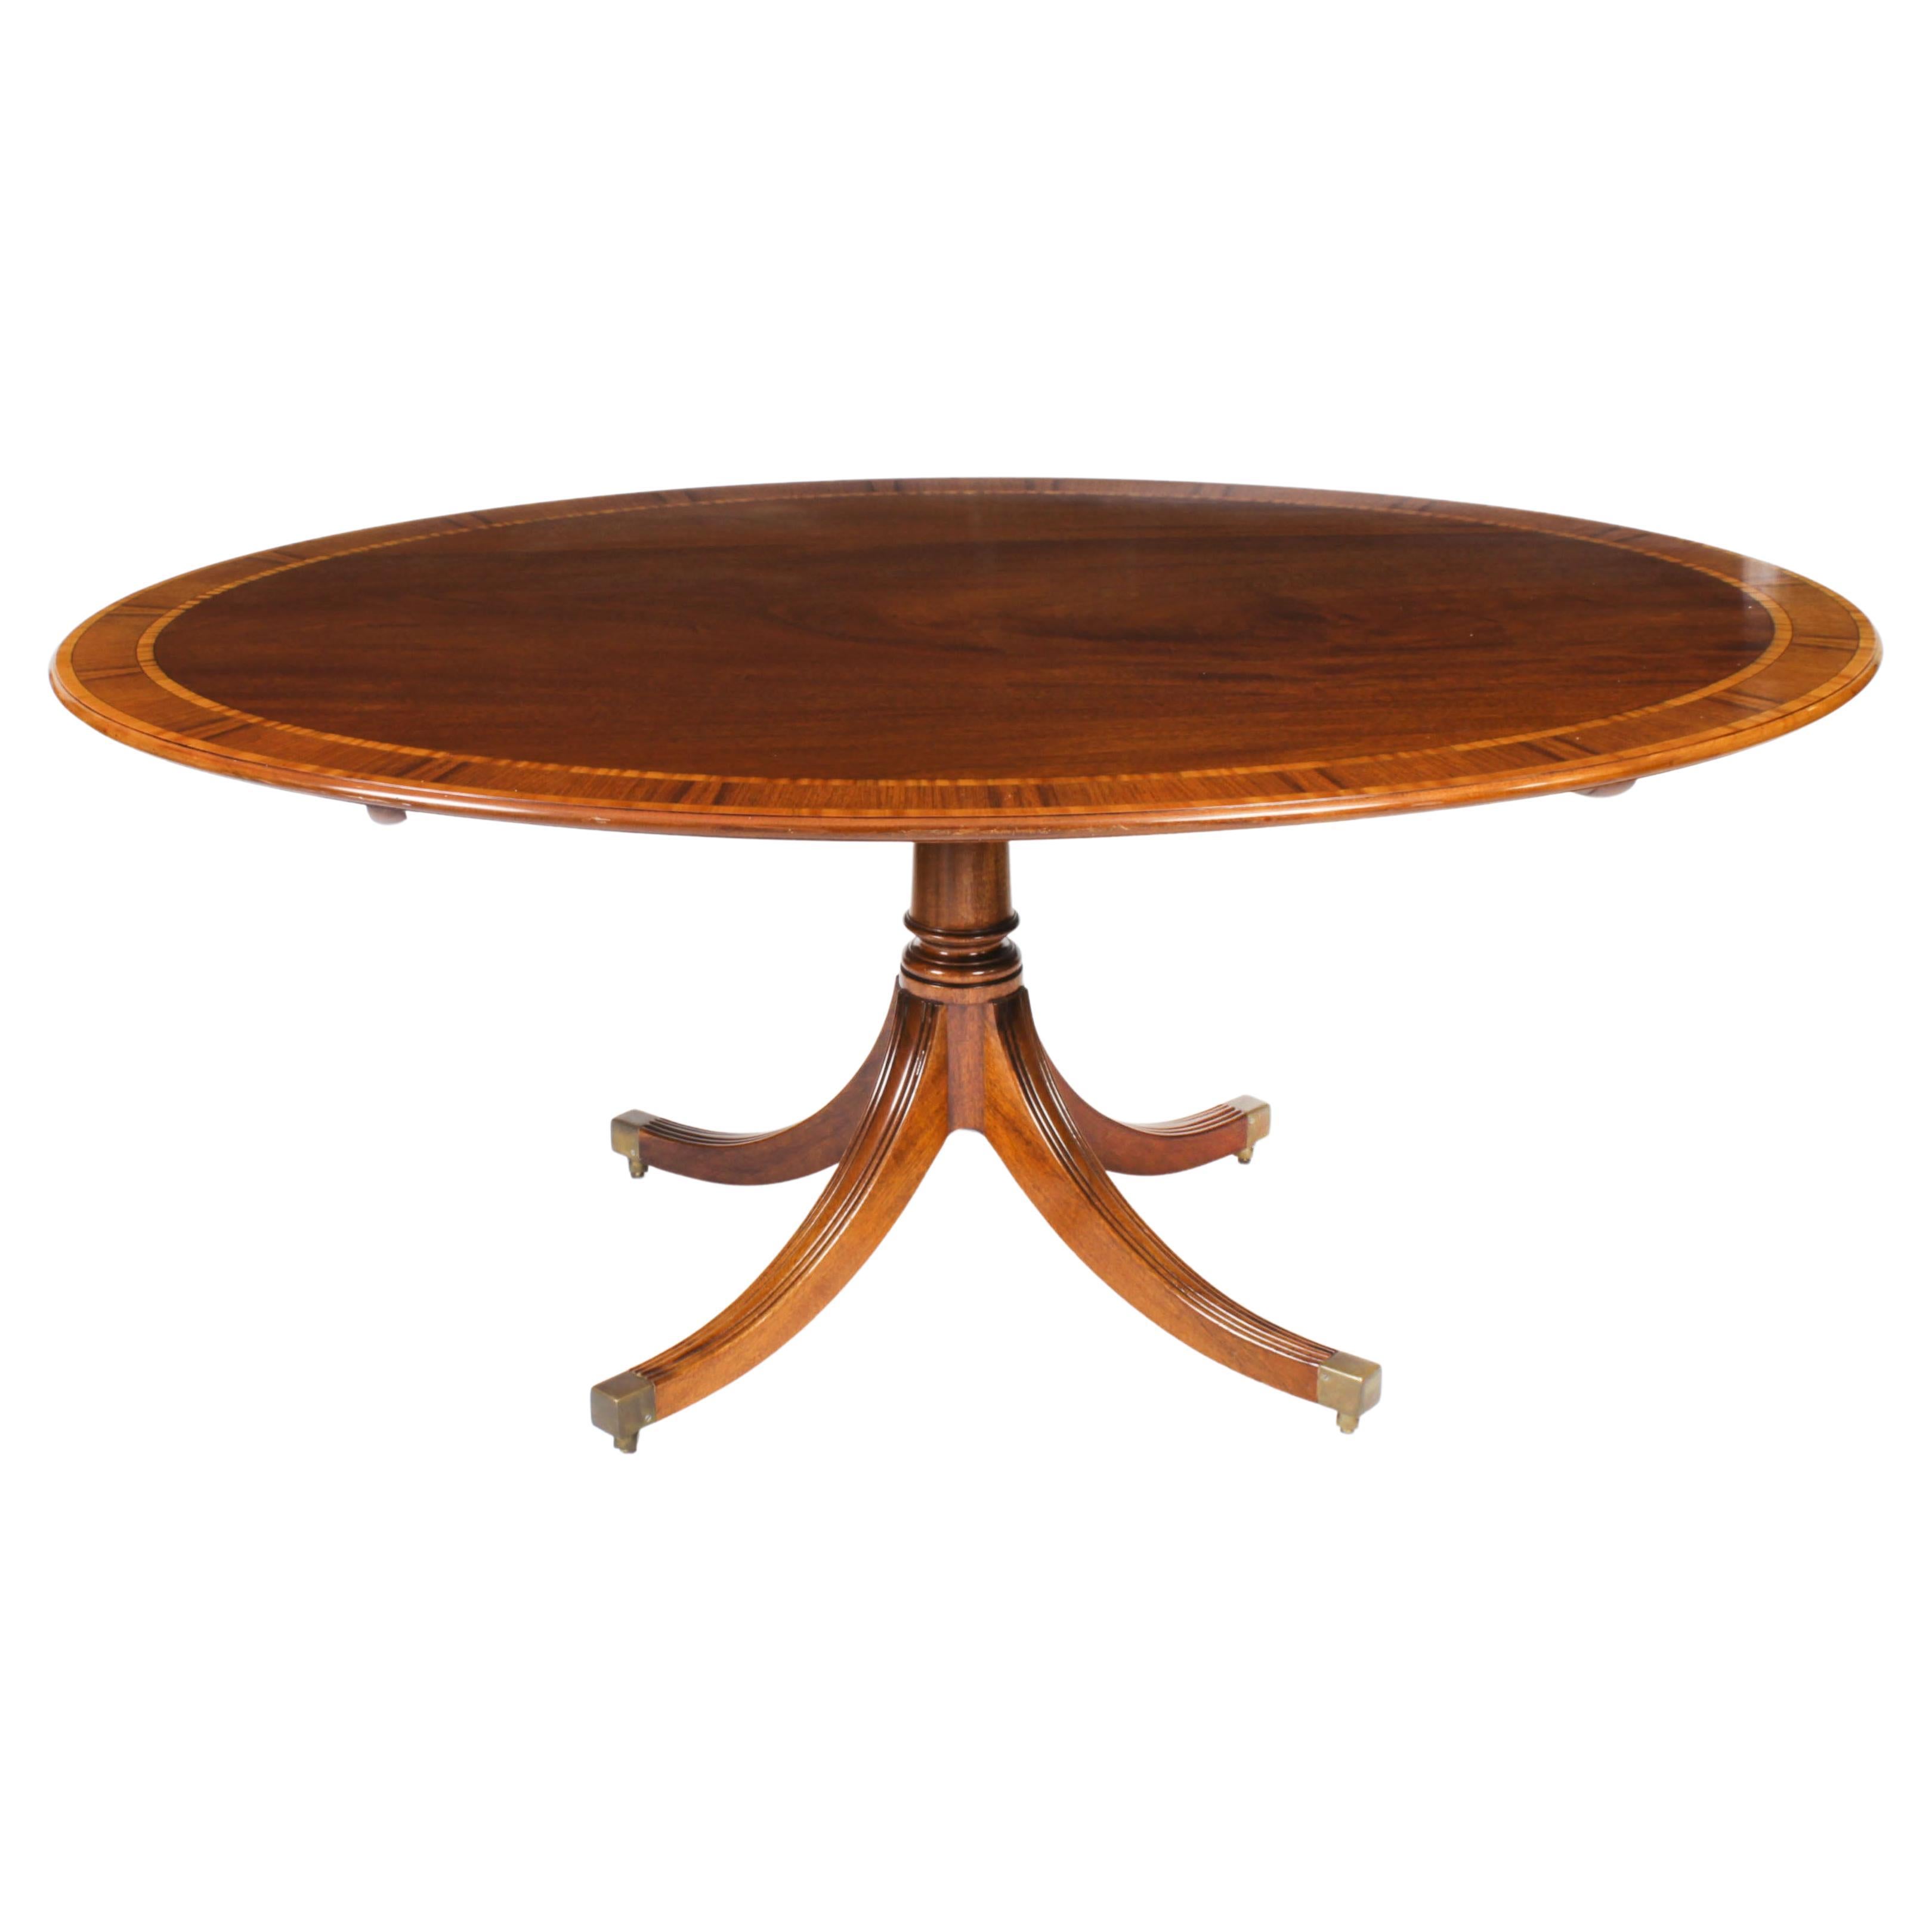 Vintage Oval Mahogany Dining Table by William Tillman, 20th Century